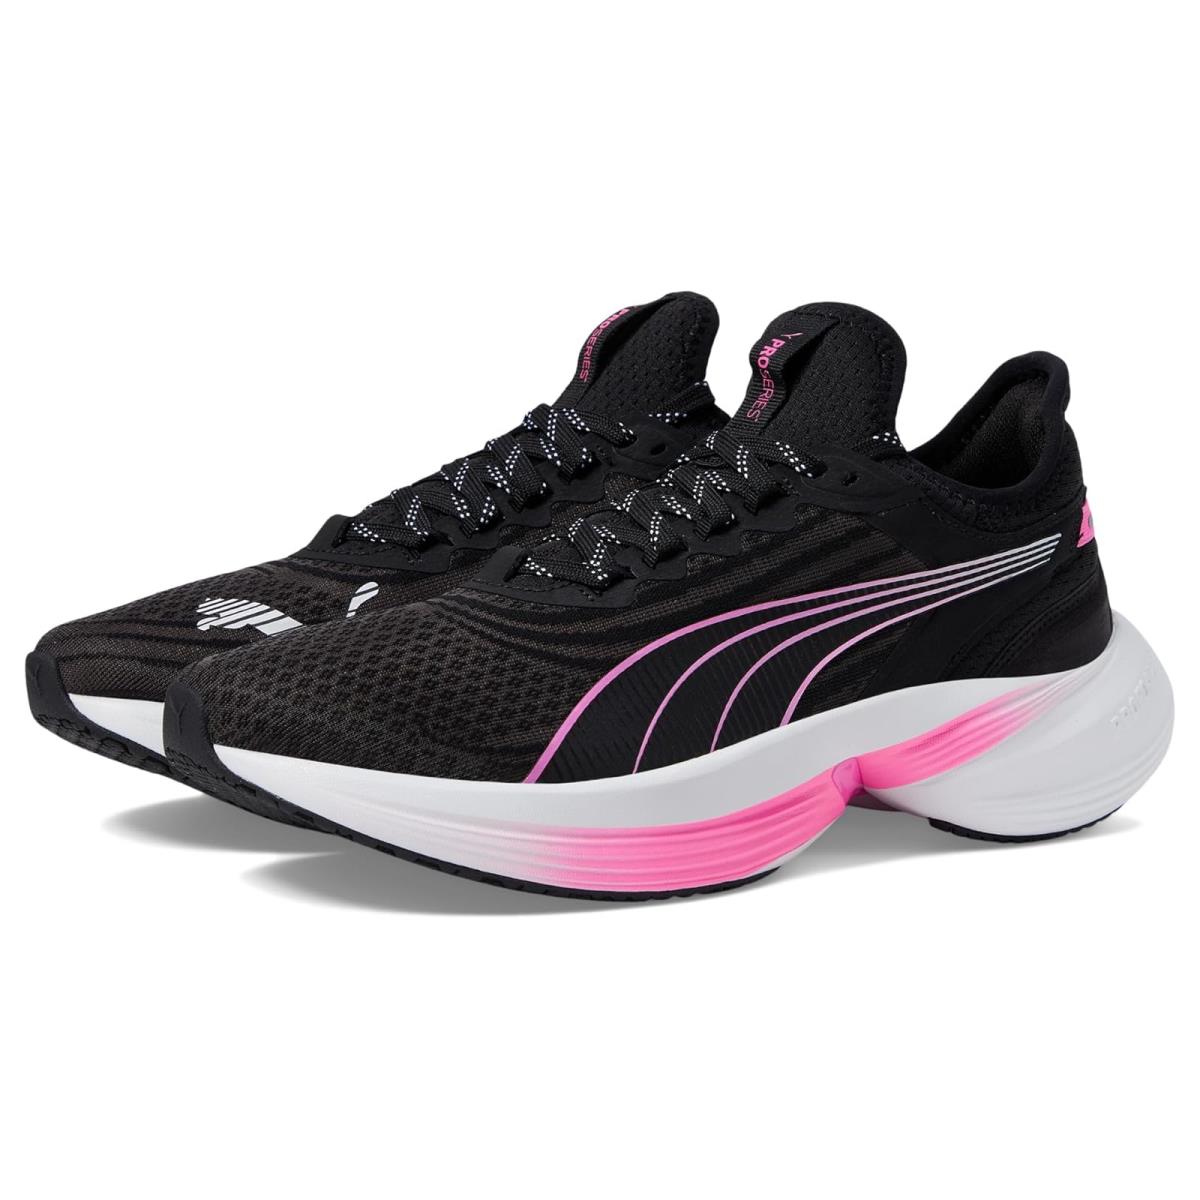 Woman`s Sneakers Athletic Shoes Puma Conduct Pro PUMA Black/Poison Pink/PUMA Silver